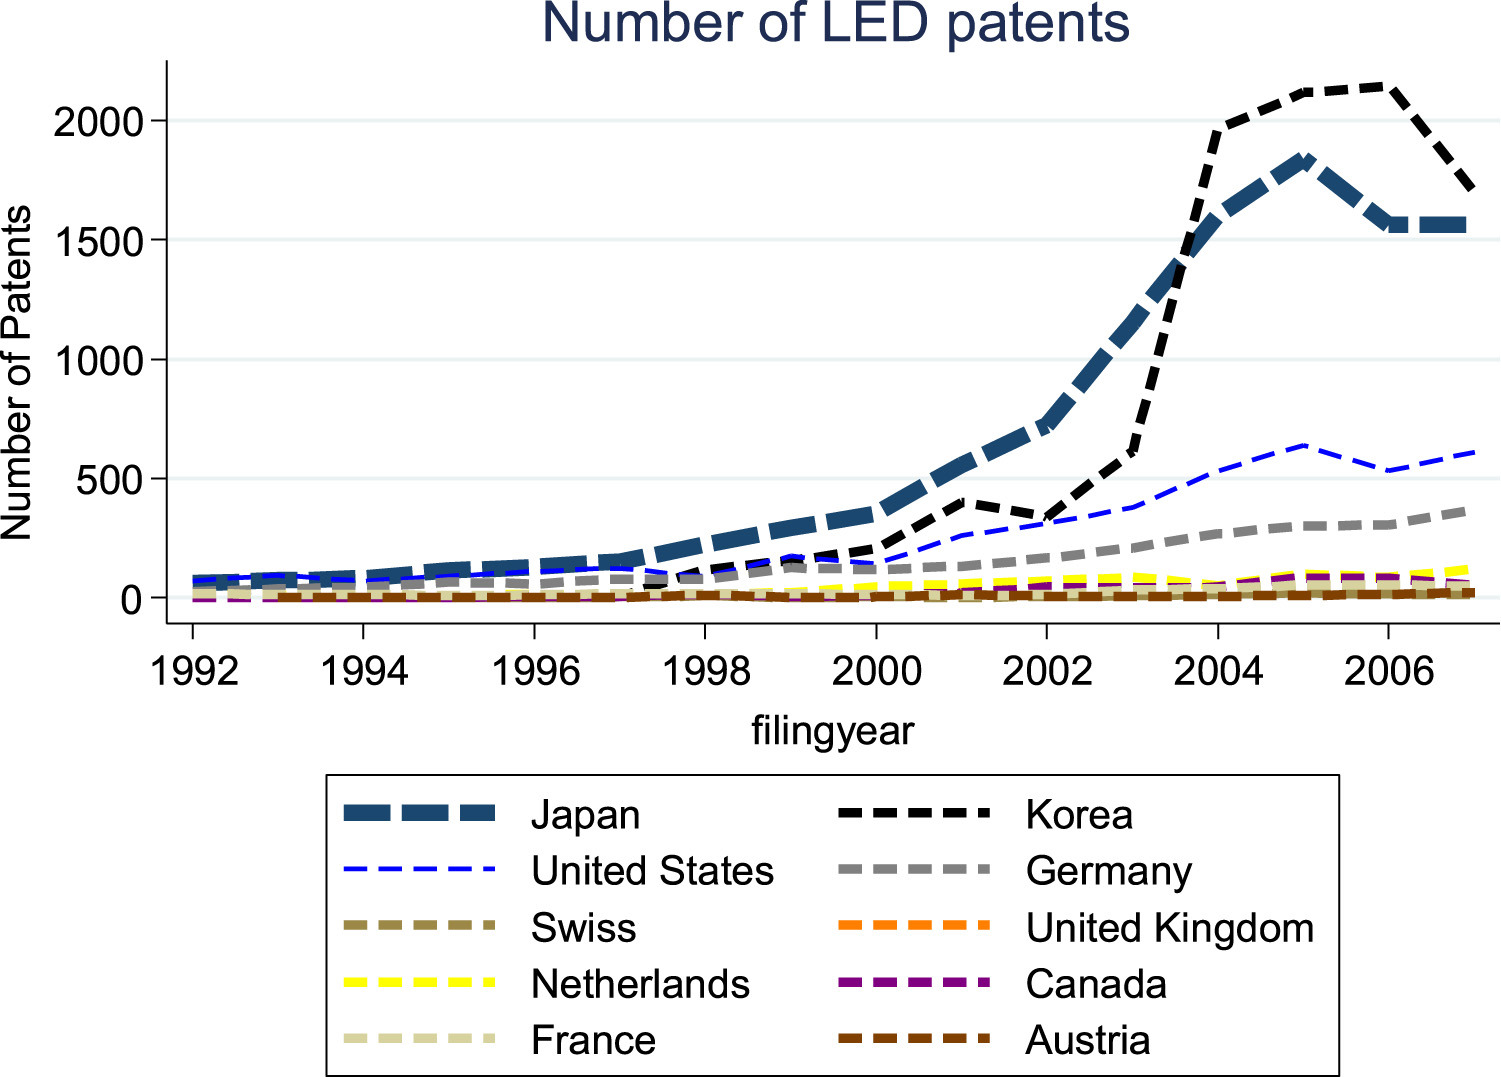 Number of LED patents